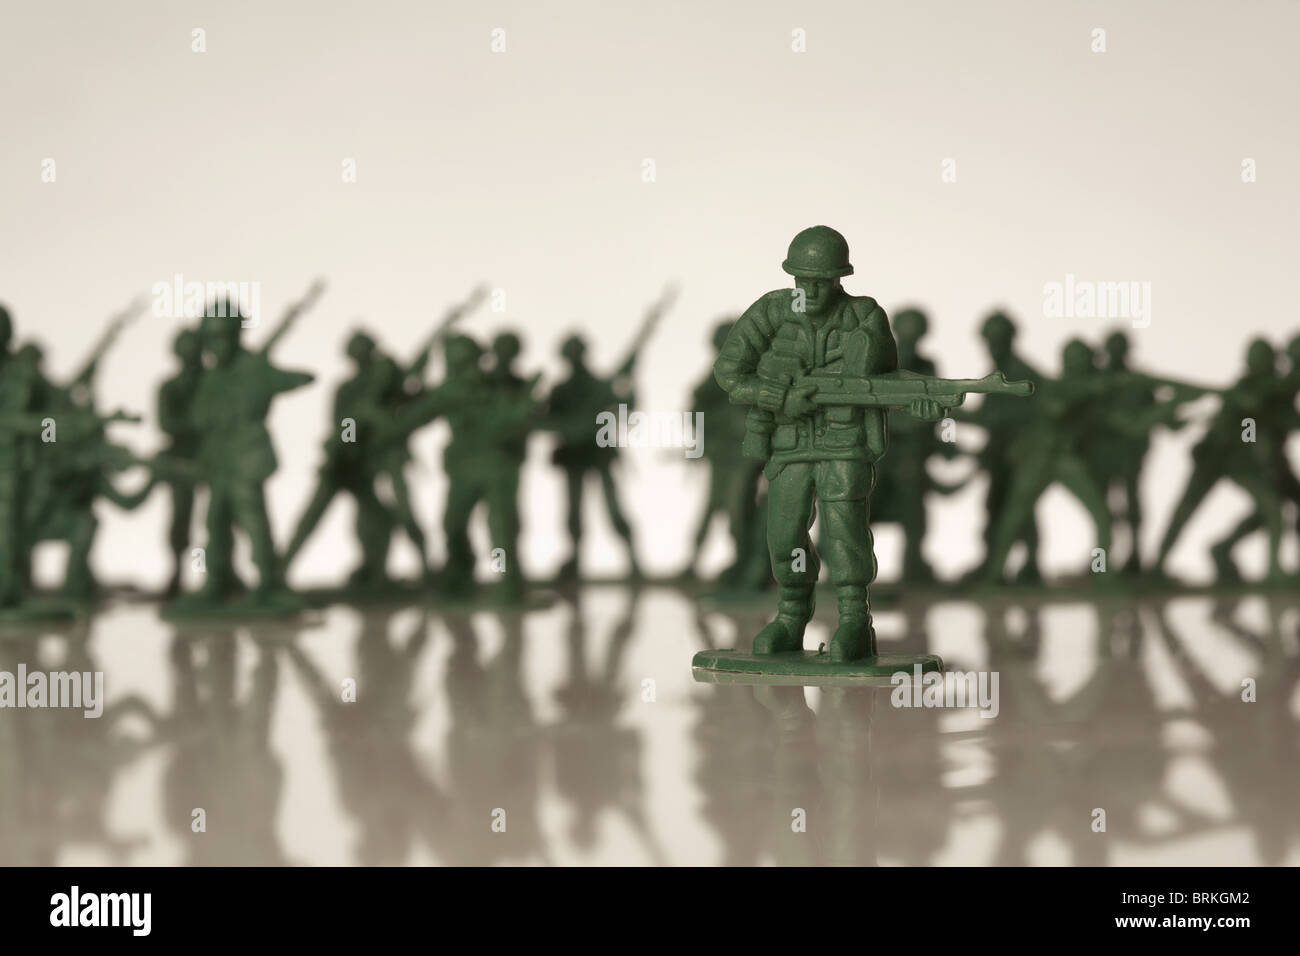 green toy soldiers out of focus in a line Stock Photo